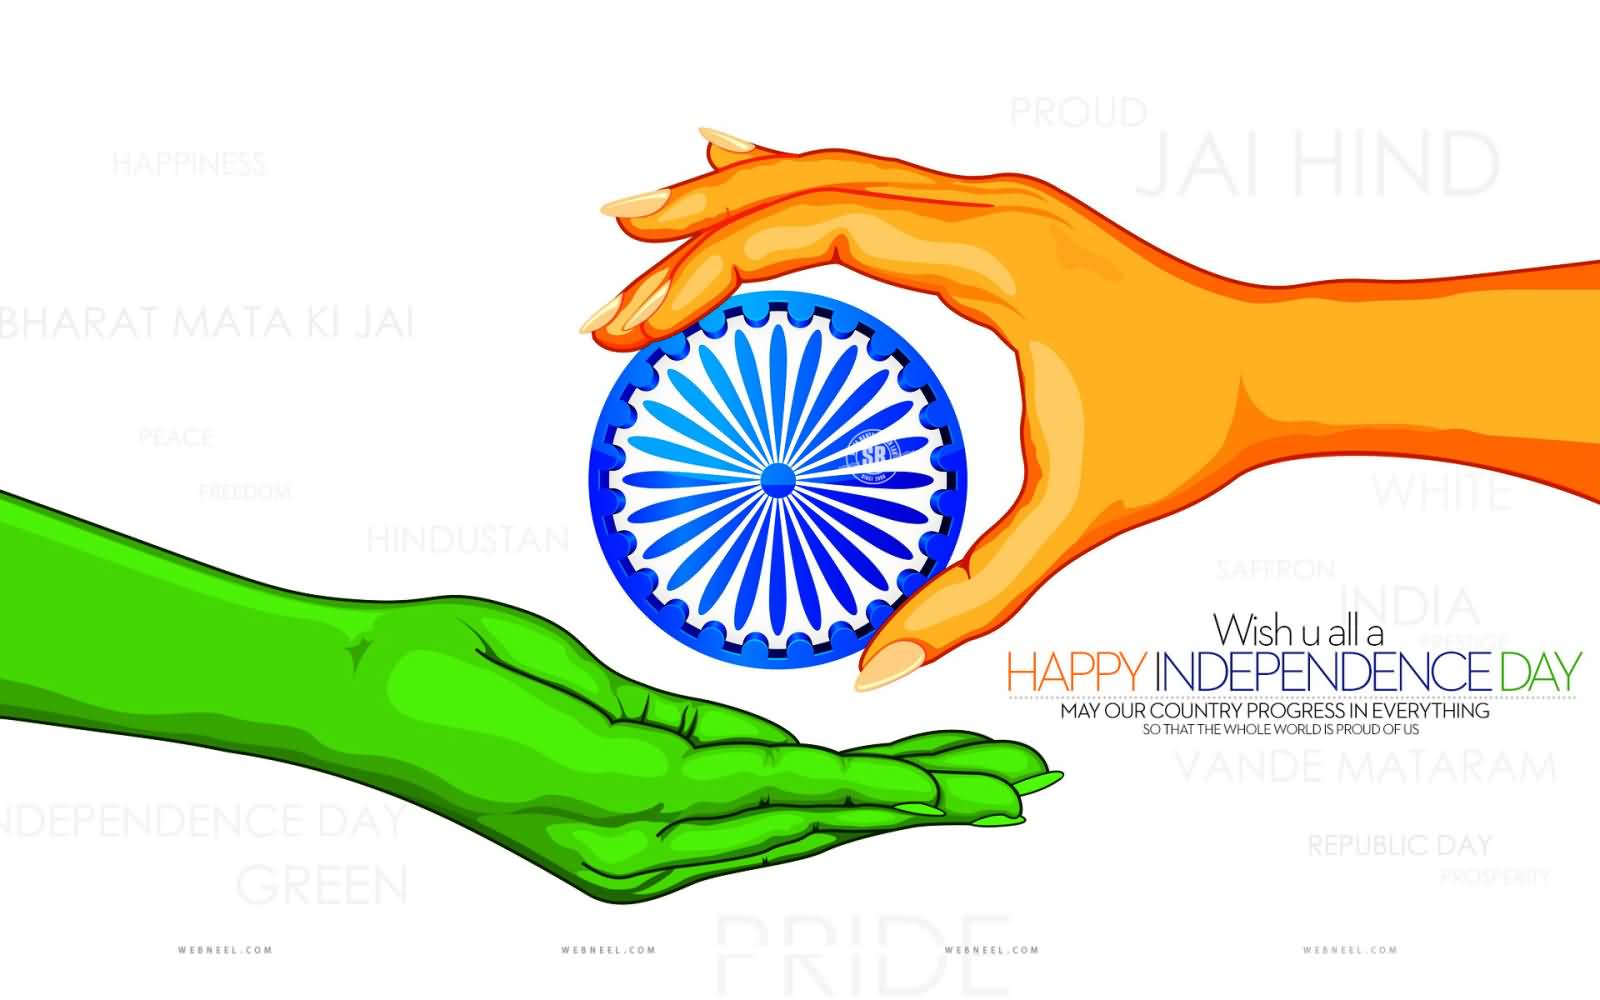 Wish You All A Happy Independence Day May Our Country Progress In Everything So That The Whole World Is Proud Of Us